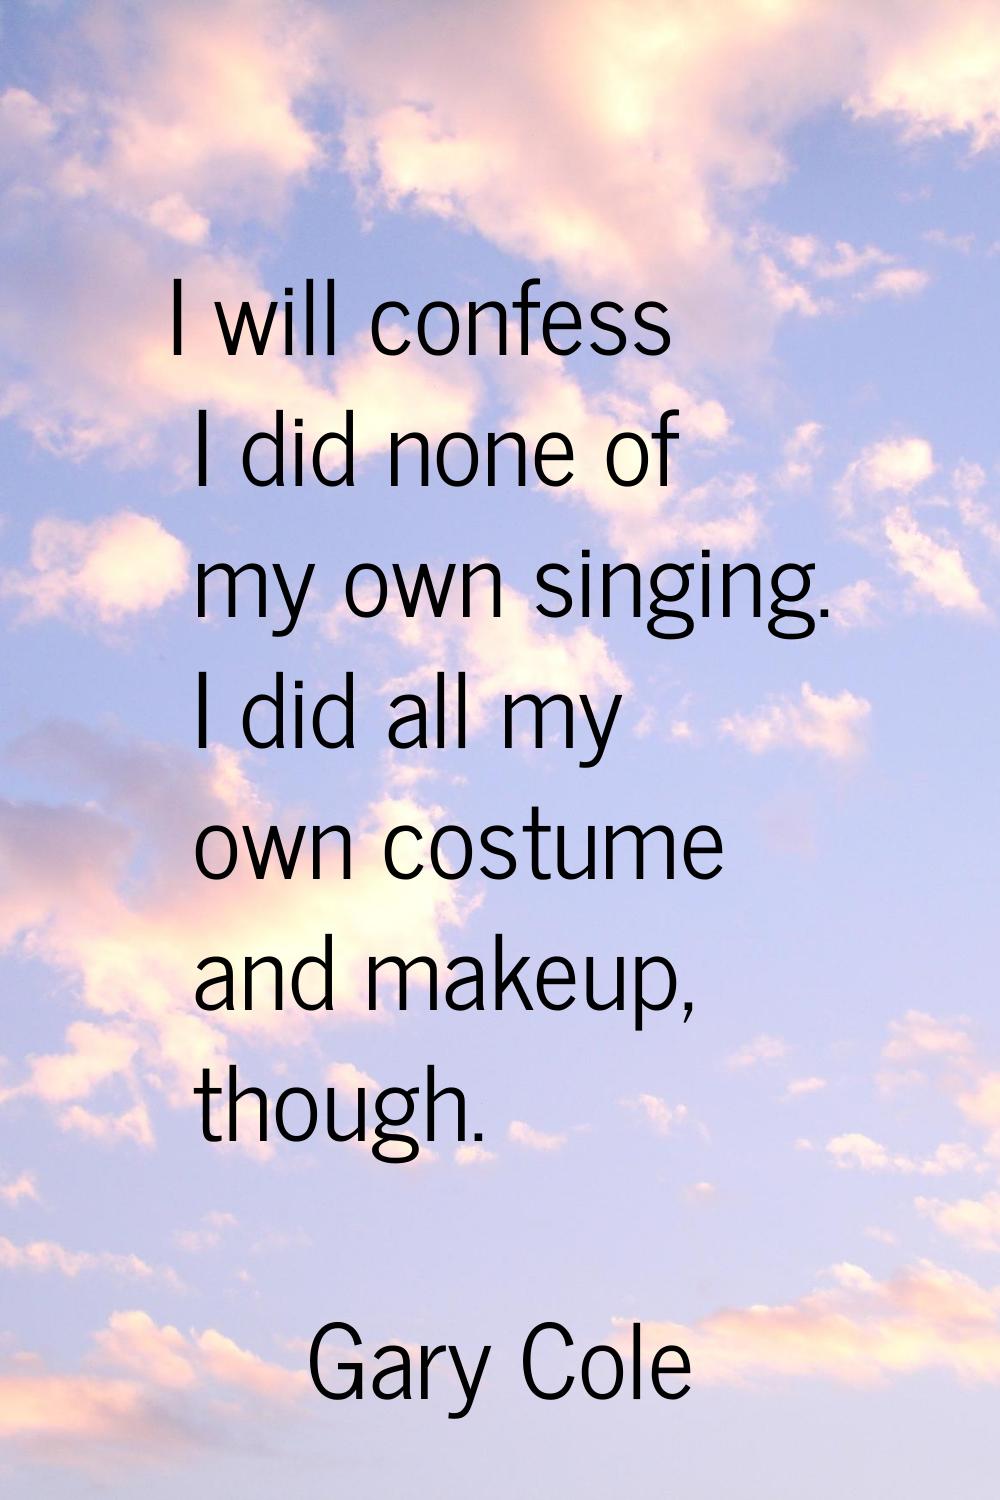 I will confess I did none of my own singing. I did all my own costume and makeup, though.